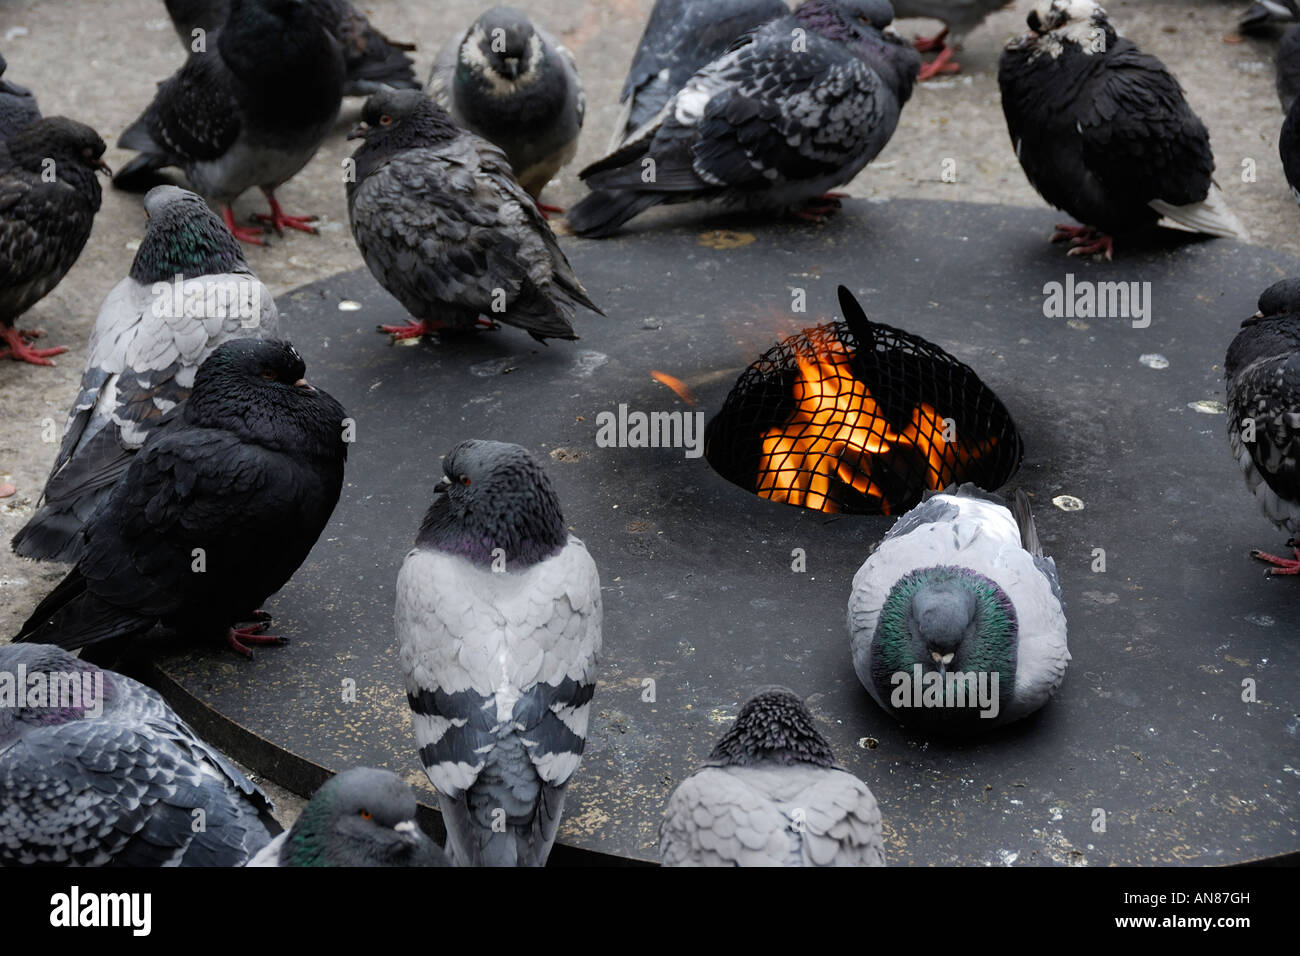 pigeons-warming-themselves-up-at-an-open-fire-pit-on-daley-plaza-on-AN87GH.jpg